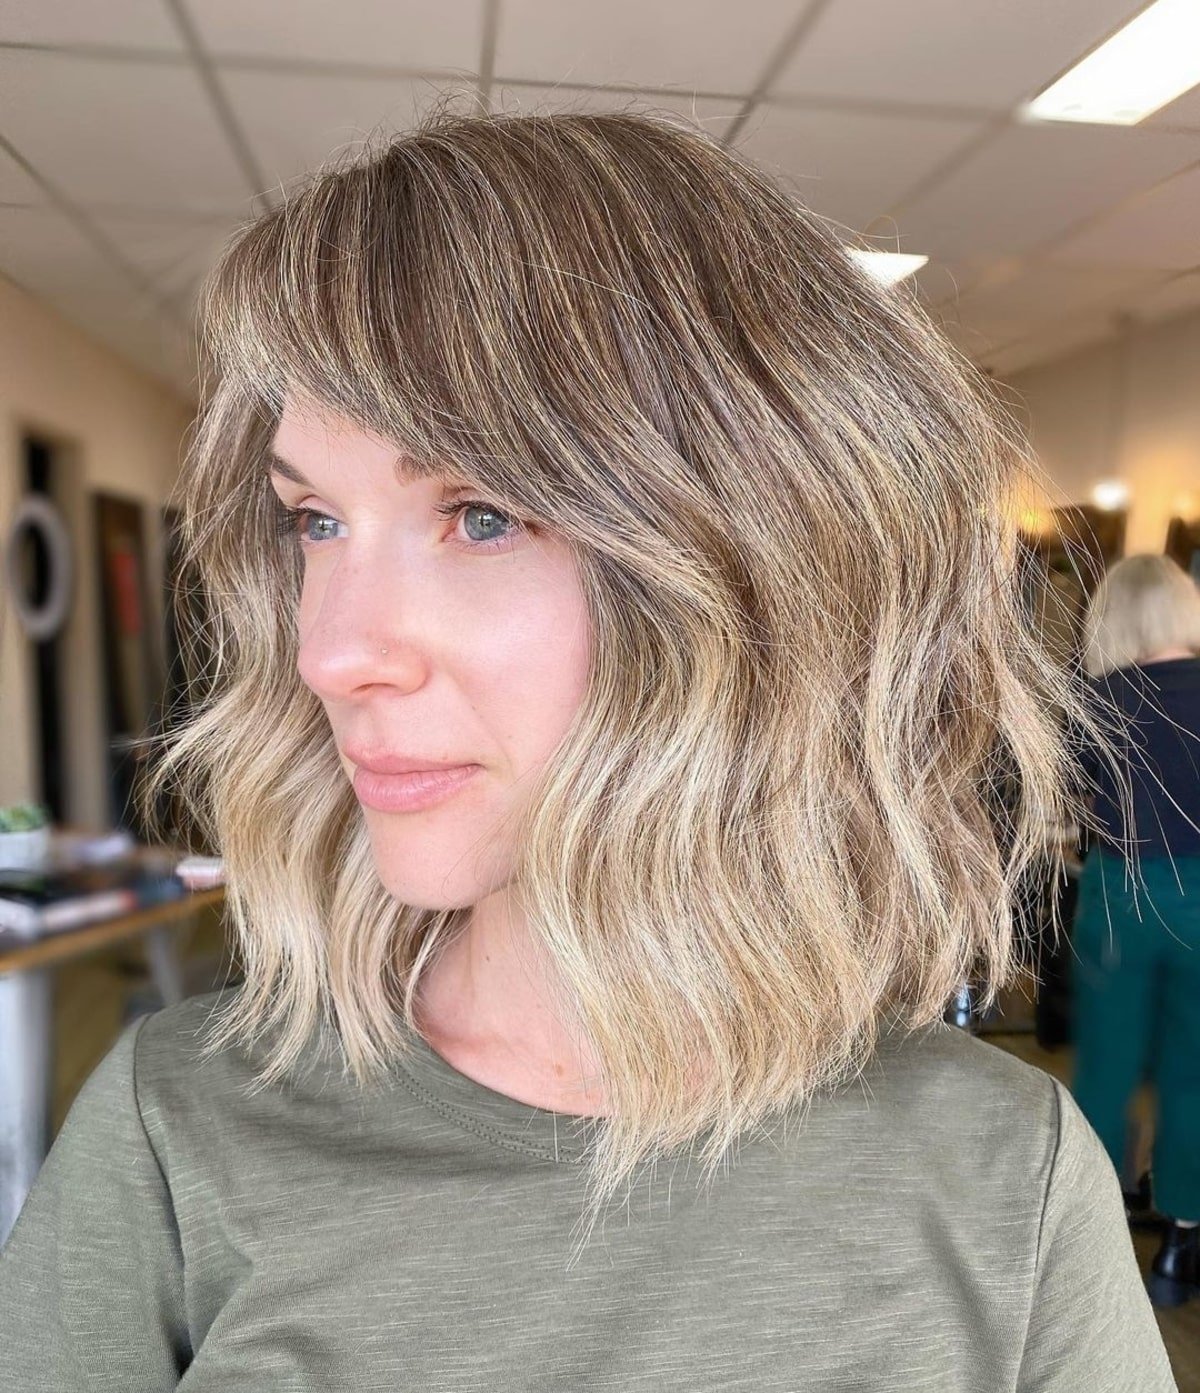 Long side-swept bangs with ombre